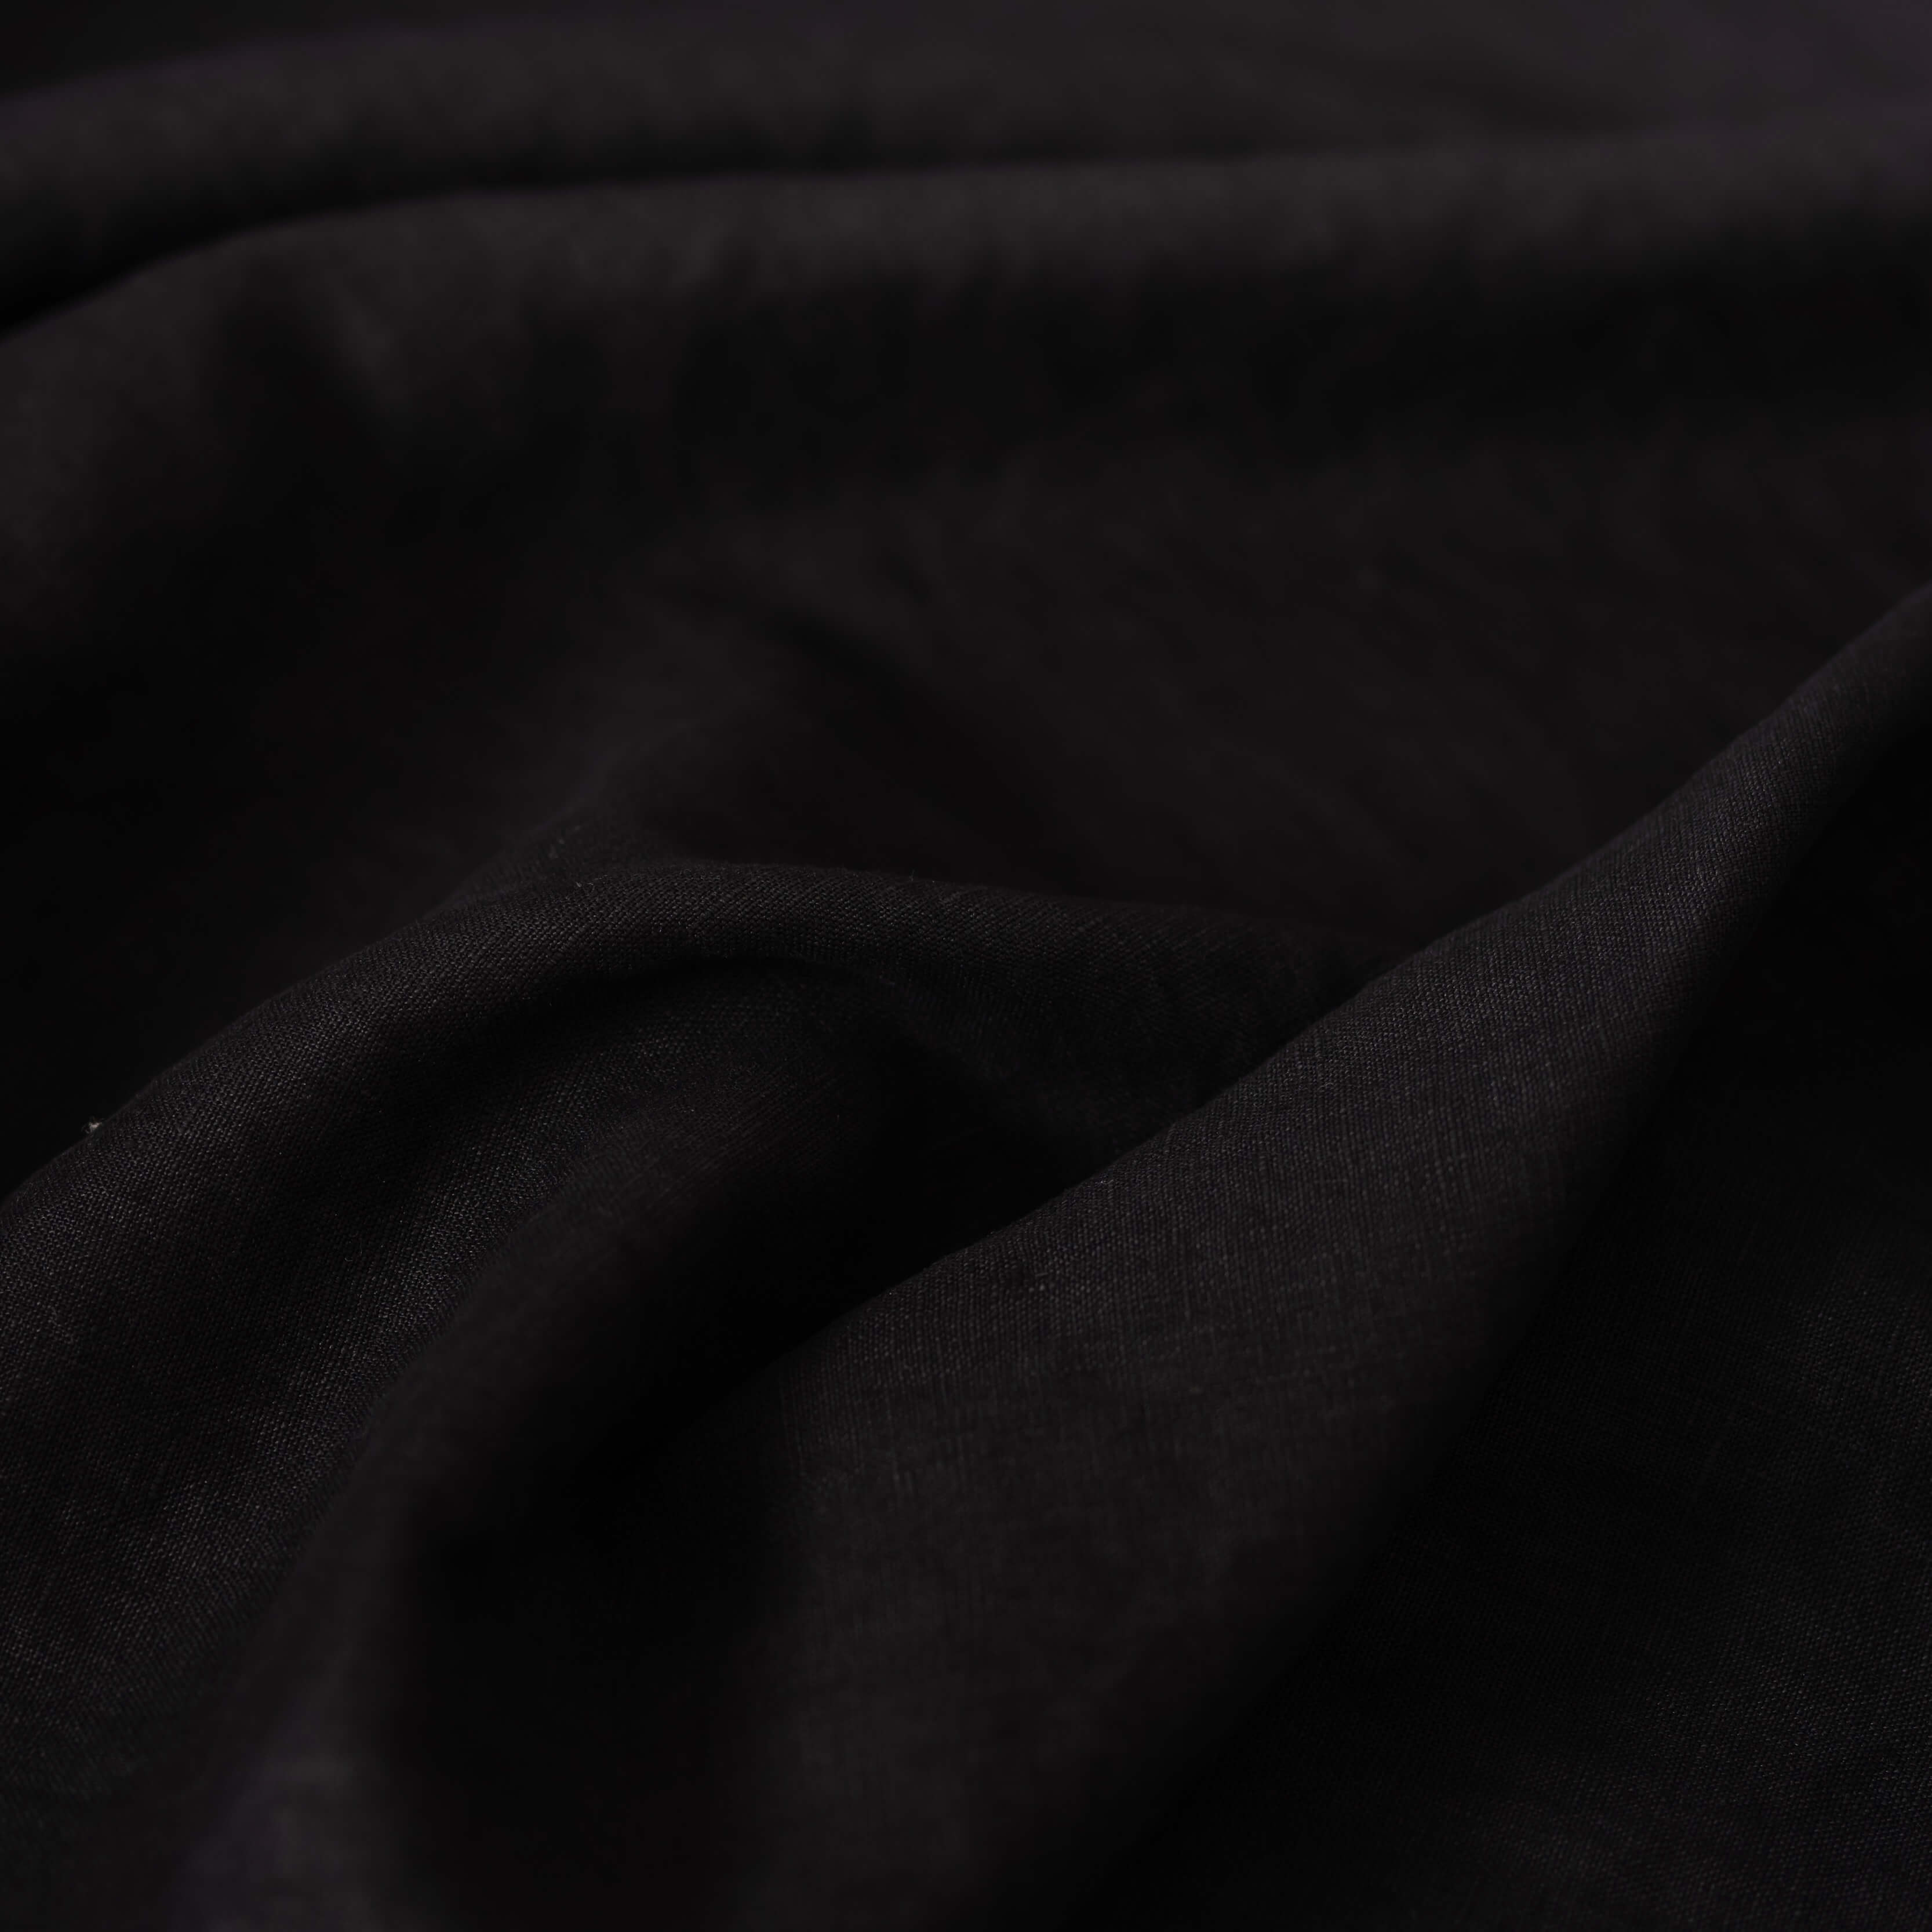 Black linen fabric scrunched up